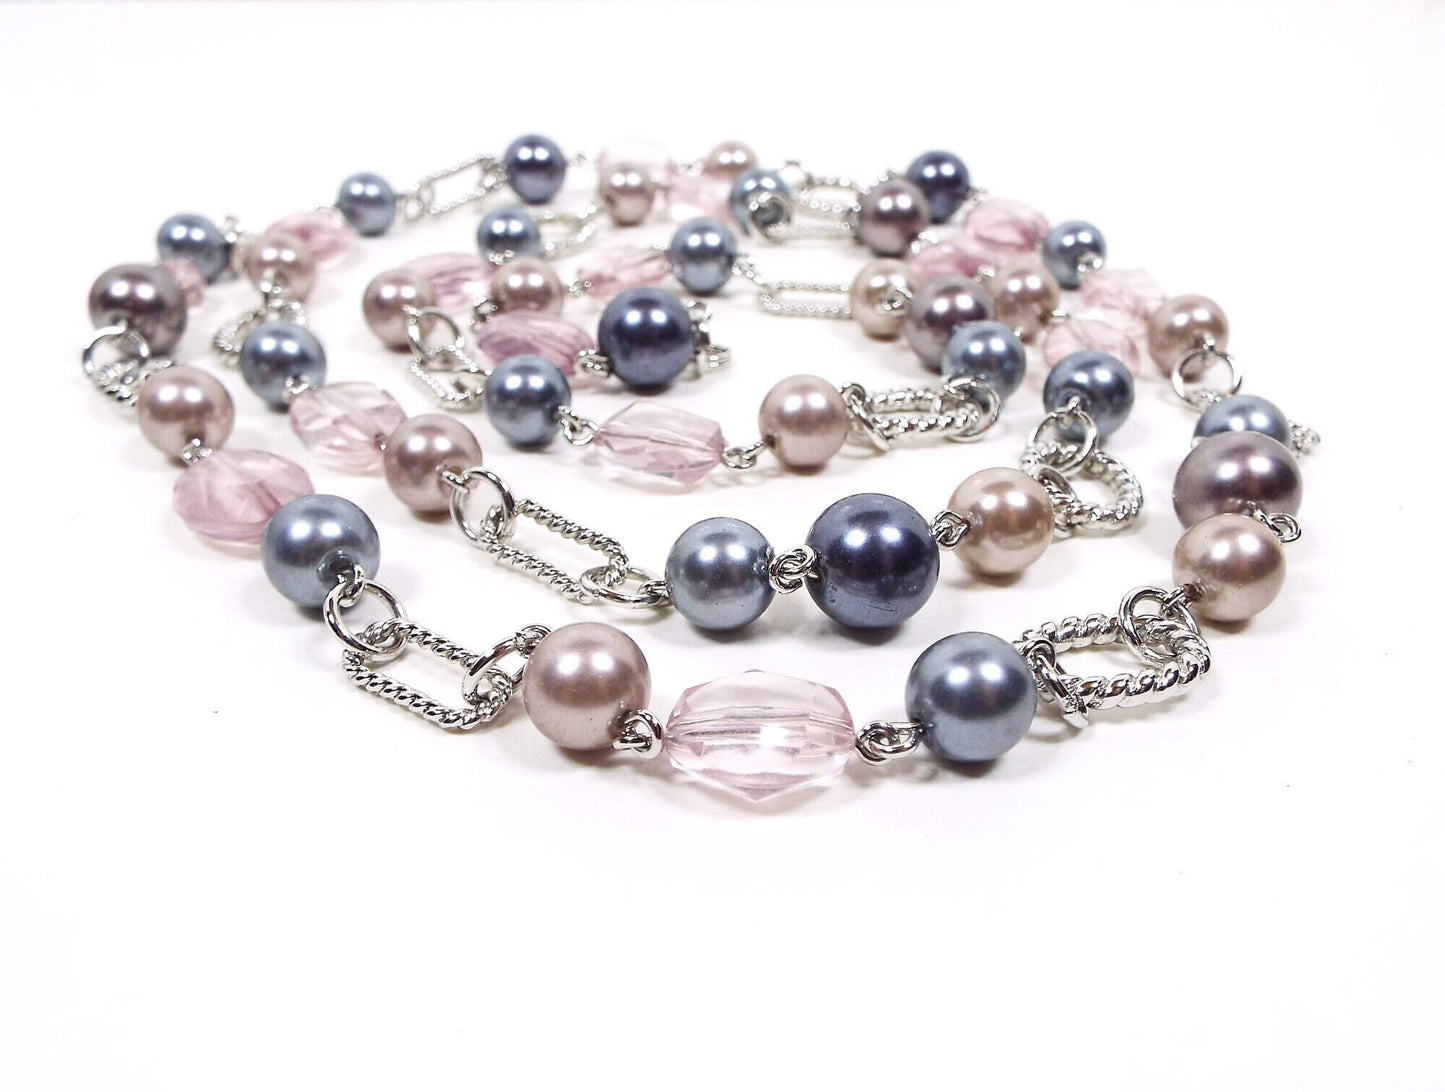 Long Premier Designs Faux Pearl and Plastic Beaded Vintage Chain Necklace